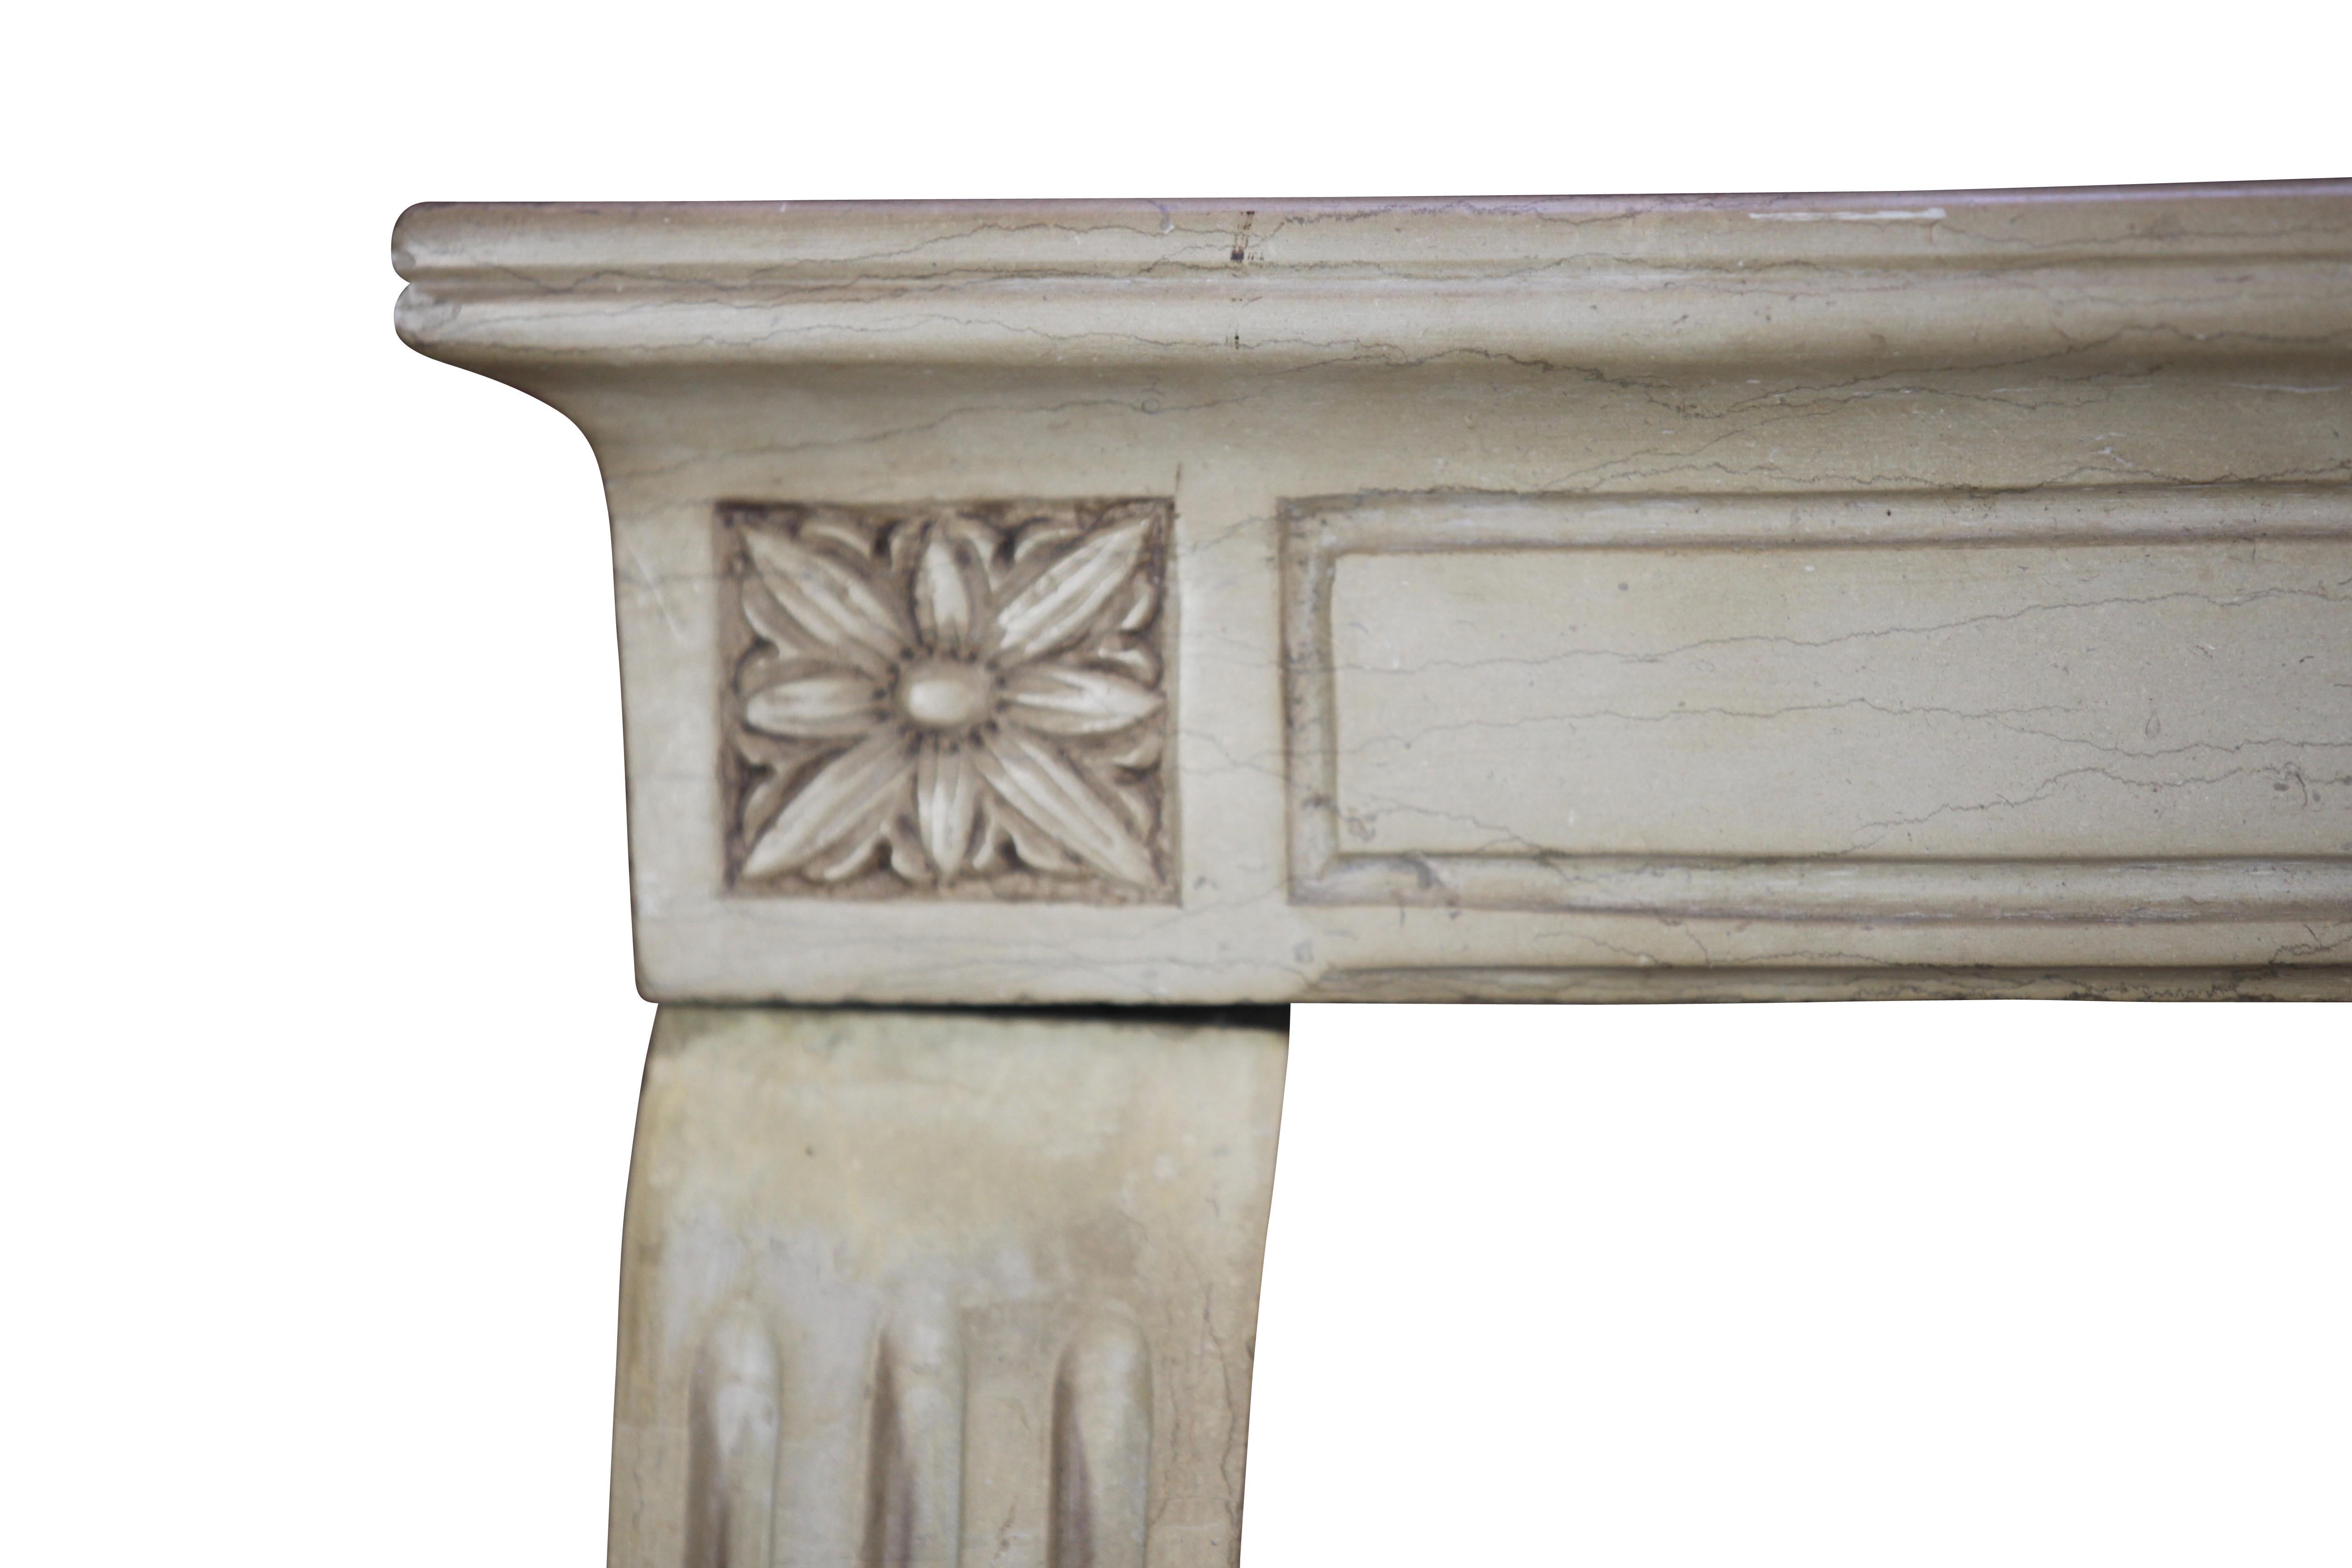 A delicate Louis XVI style, 19th century vintage fireplace surround in a bicolor Burgundy hard stone/marble. Quite an elegant mantle.
Measures:
116 cm exterior width 45.67 inch
95 cm exterior height 37.4 inch
95 cm interior width 37.4 inch
86